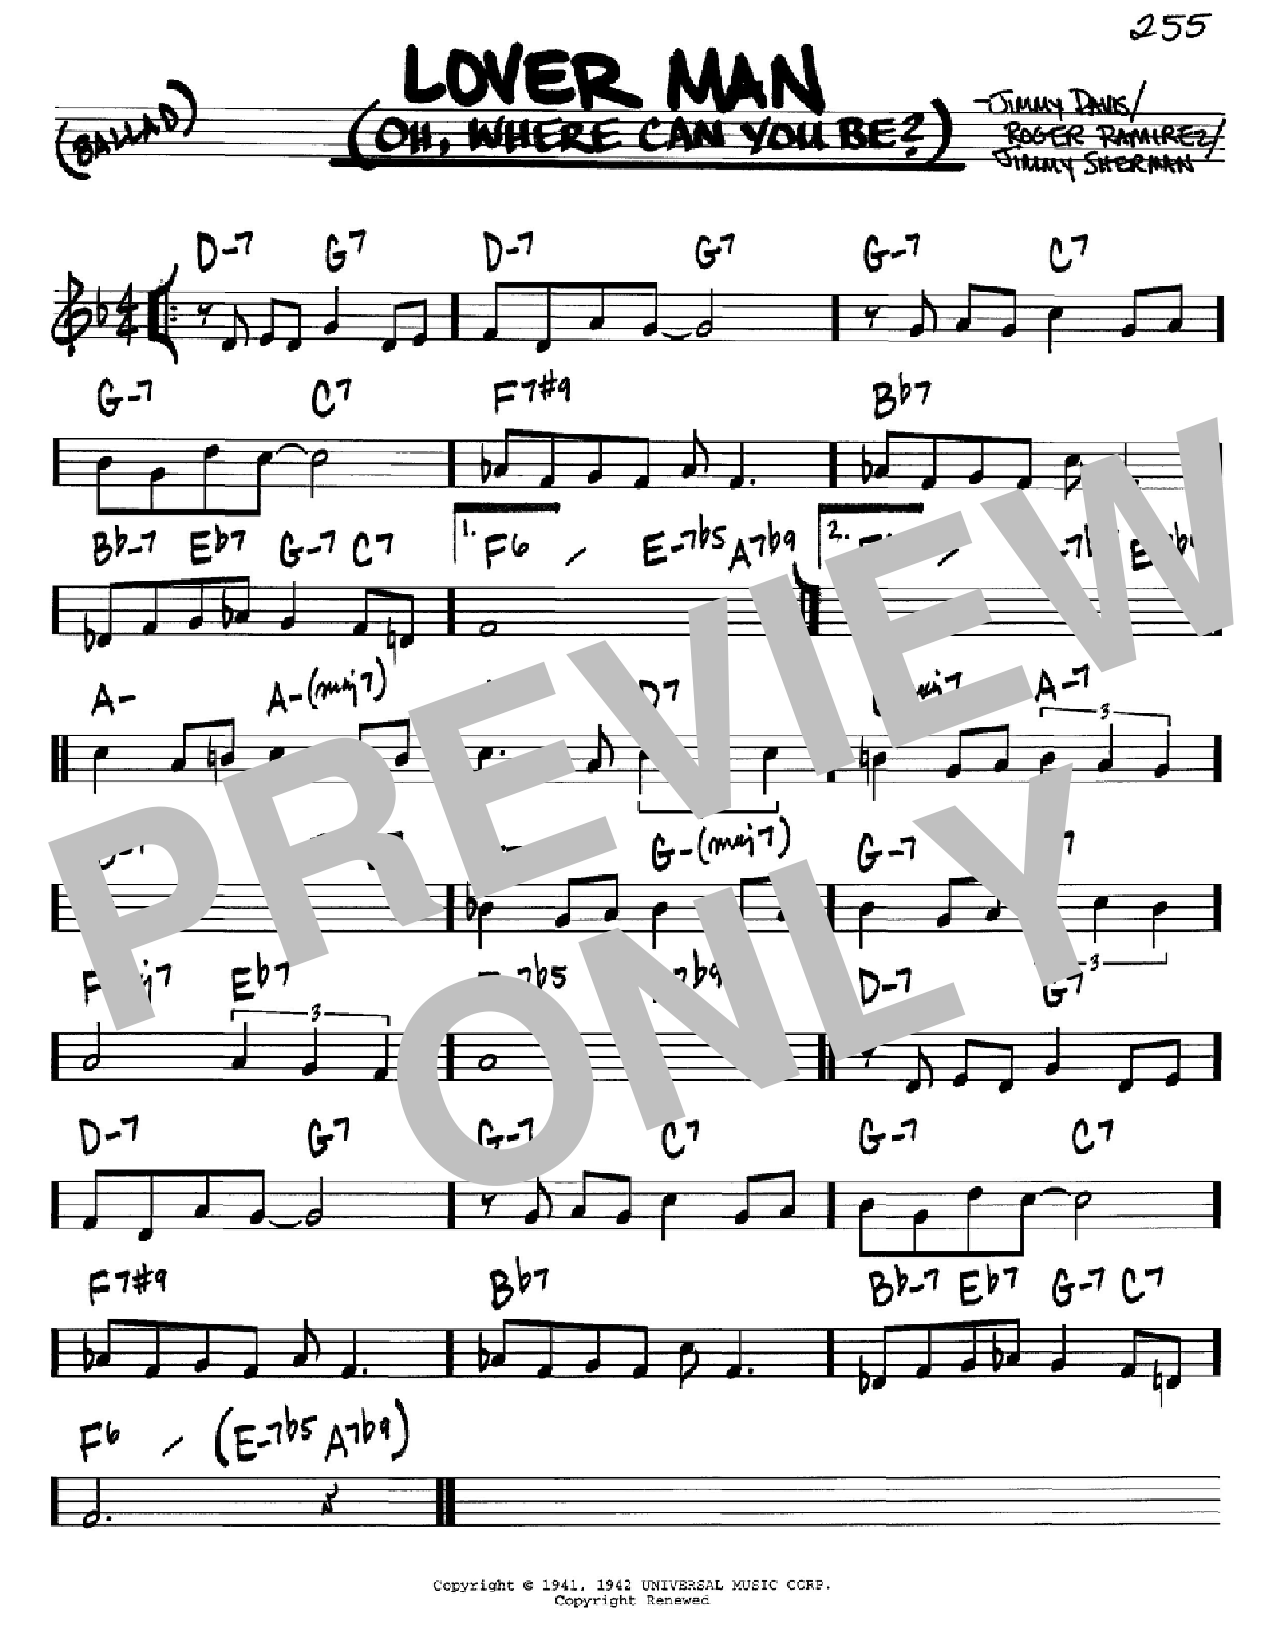 Download Billie Holiday Lover Man (Oh, Where Can You Be?) Sheet Music